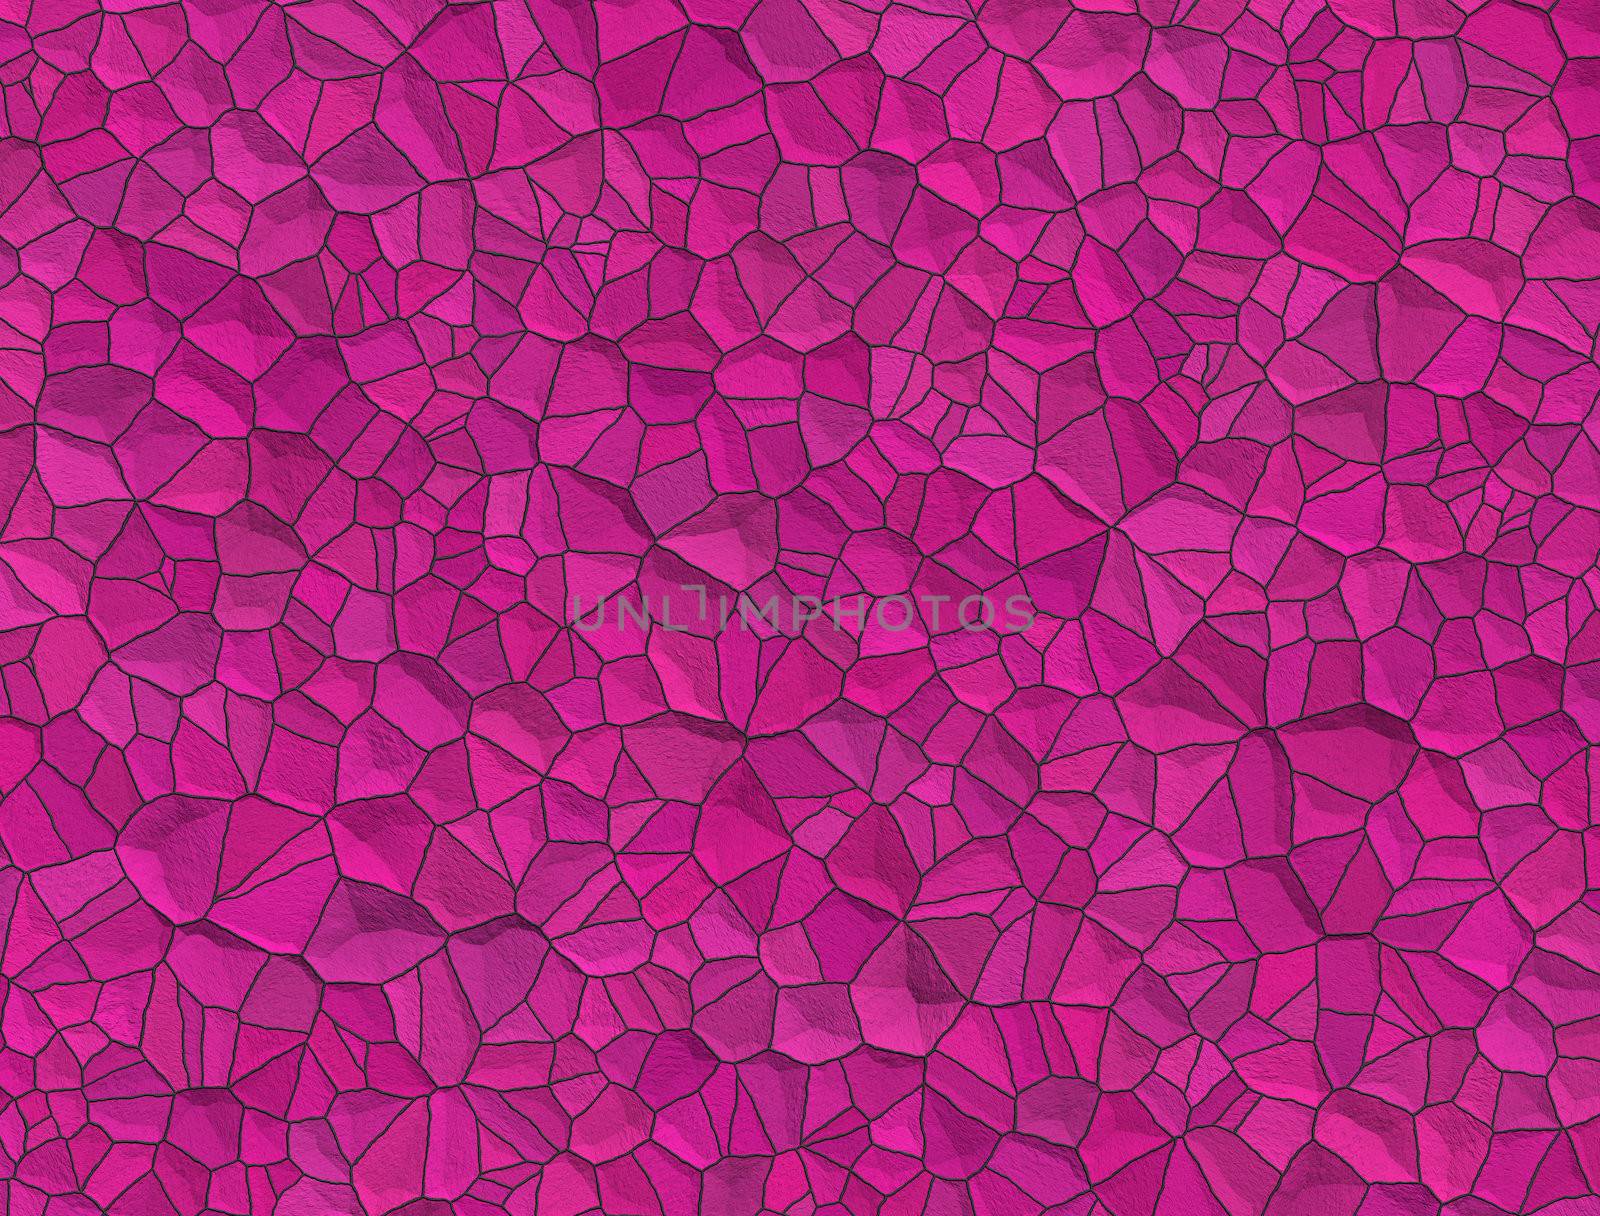 Abstract background with tiles in pink by sfinks